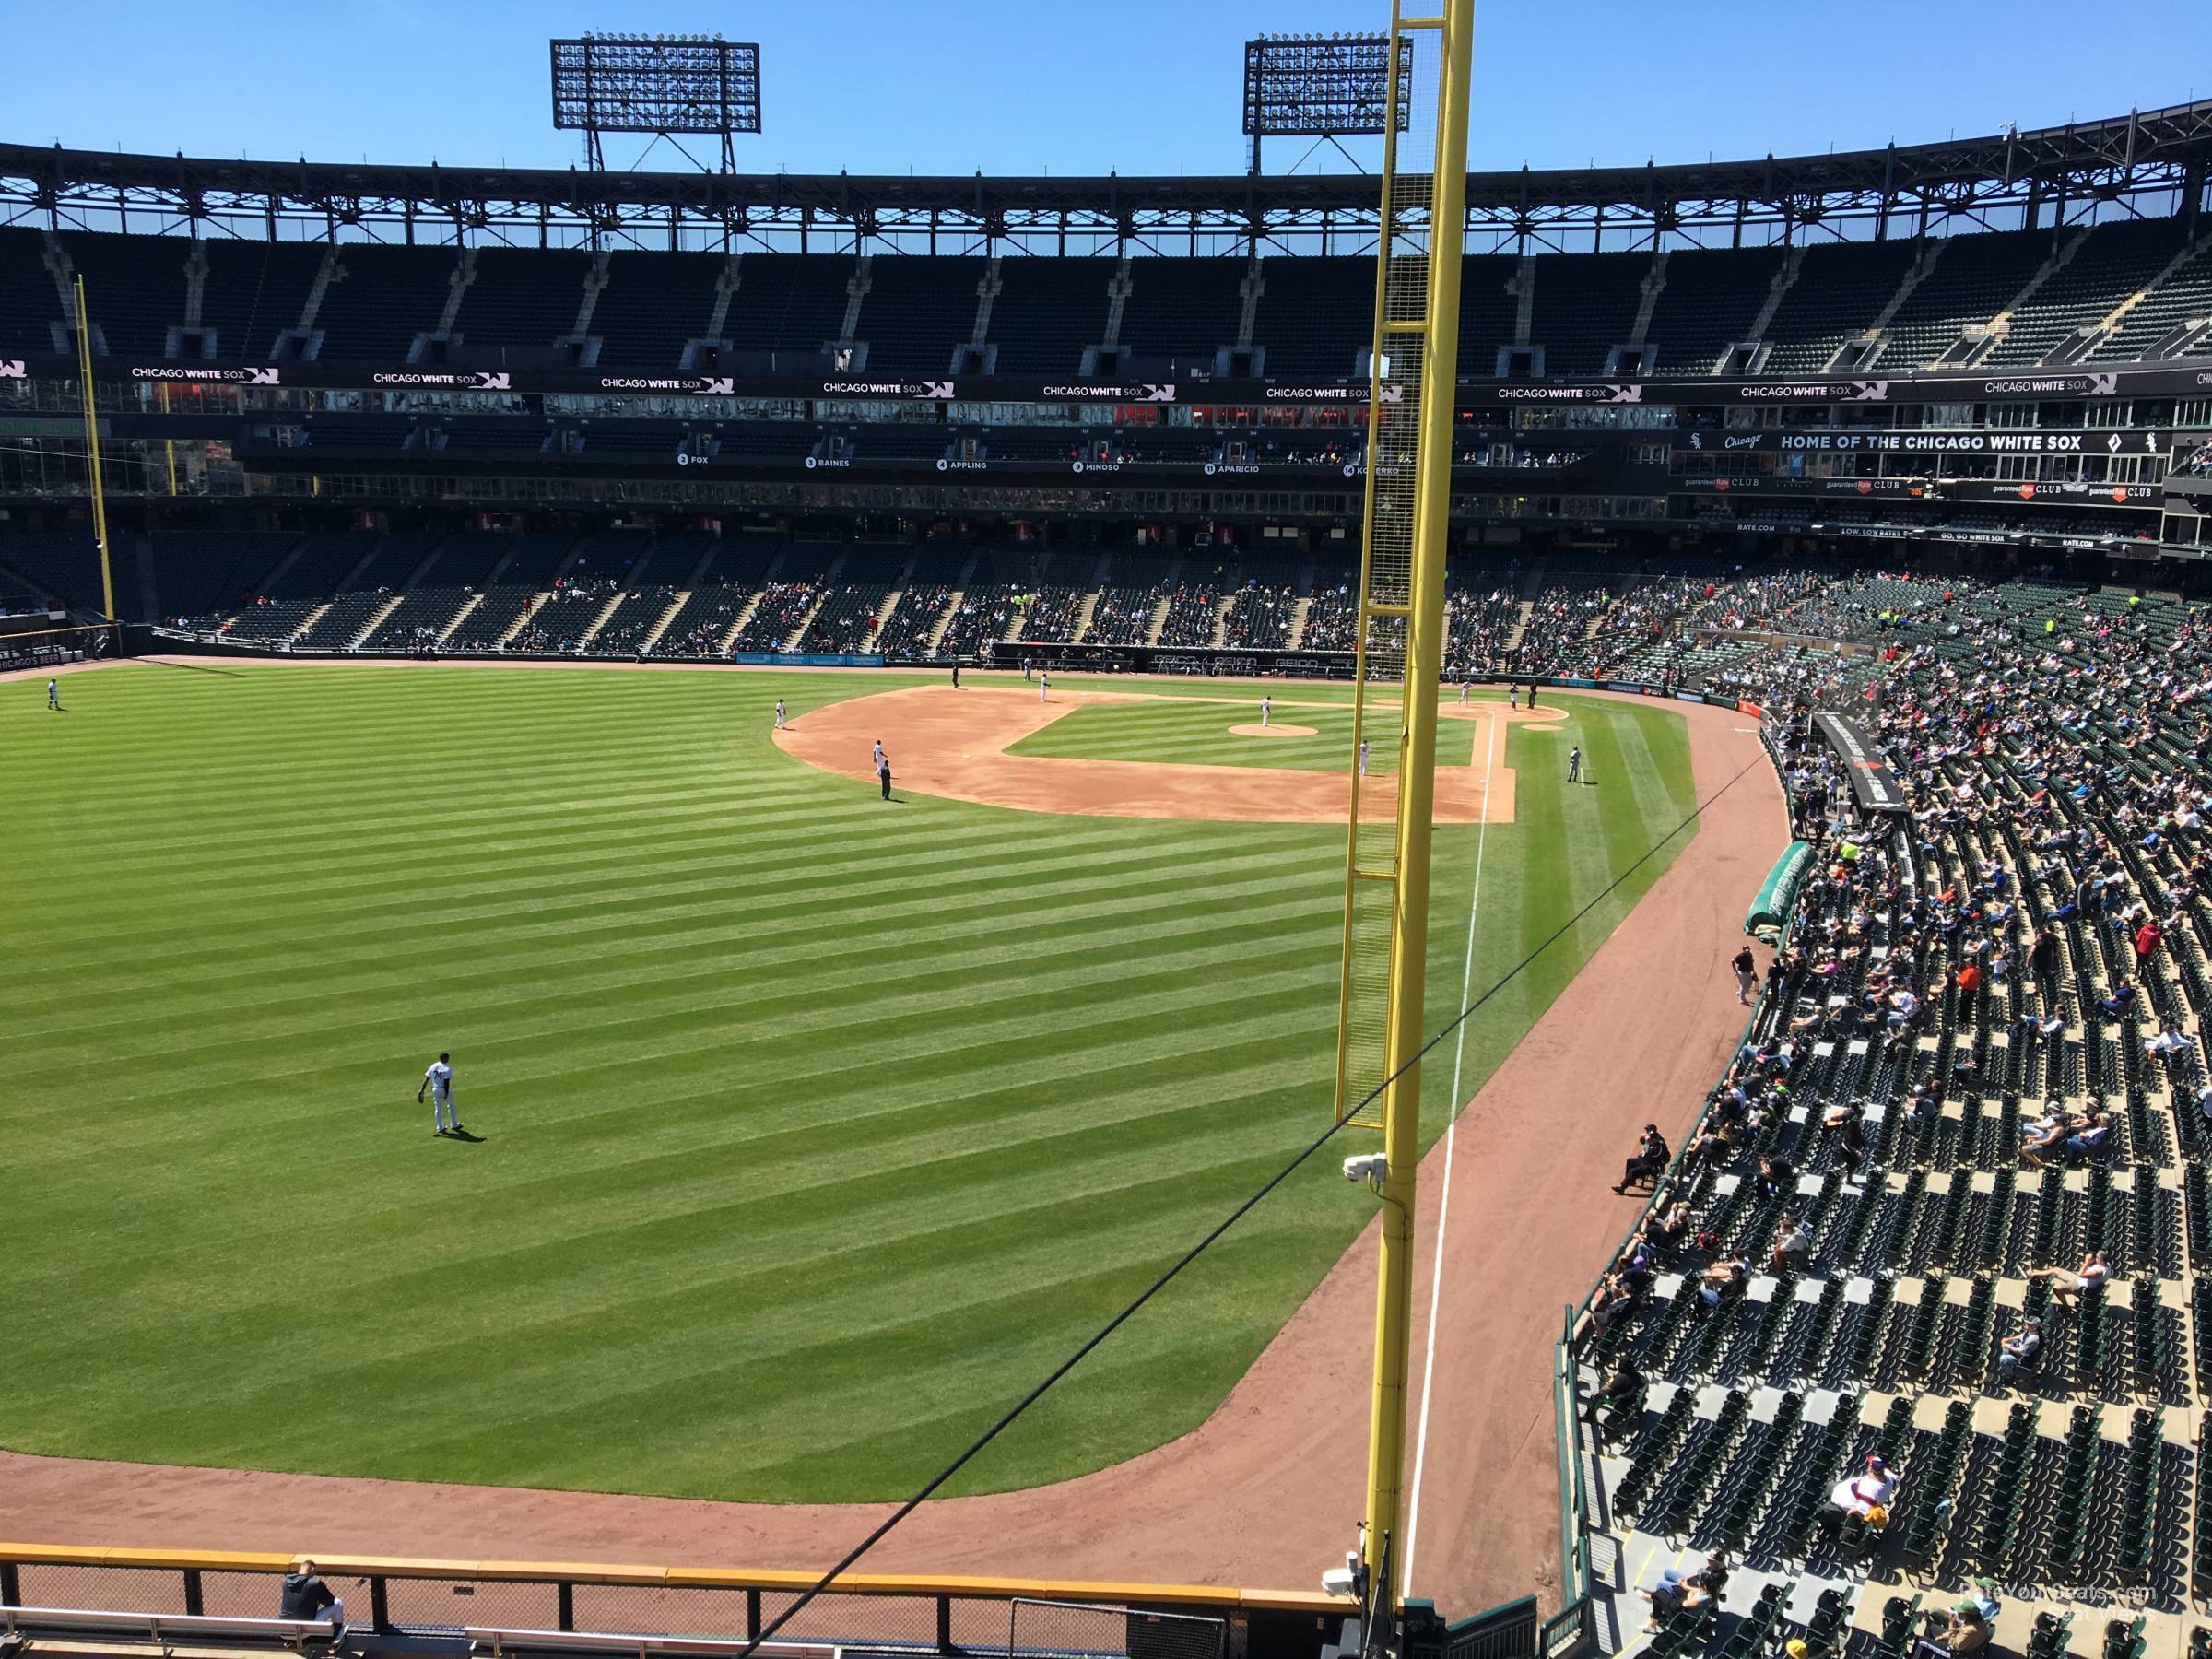 section 357, row 1 seat view  - guaranteed rate field